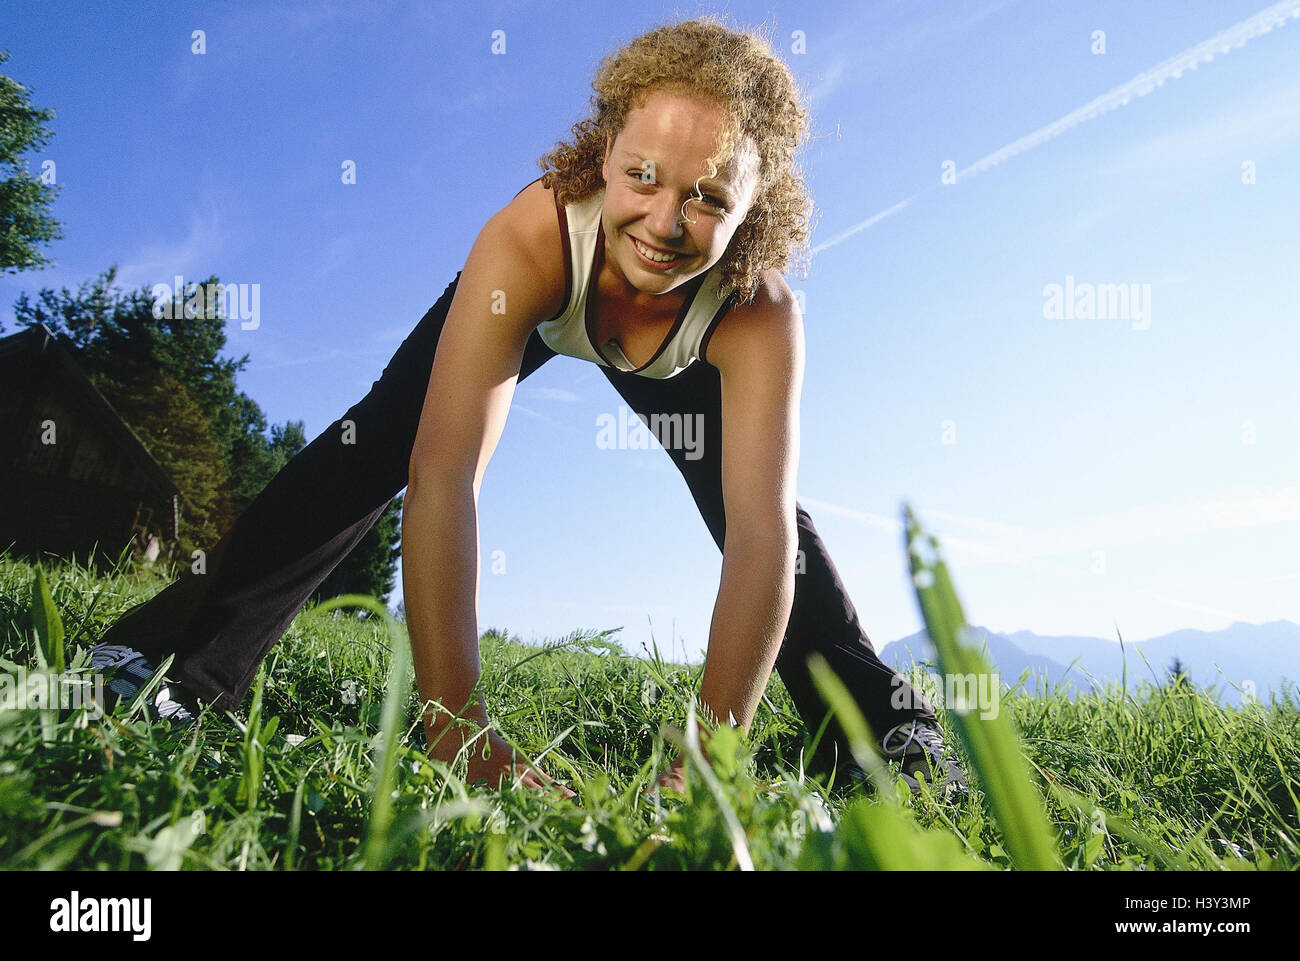 Meadow, woman, young, gymnastics, stretching, model released, outside, leisure time, hobby, sport, fitness, gymnastics practise, distension practise, Stretching, stretch, motion, vitality, activity, training, train, upper part of the body, prevent, feet, spread Stock Photo